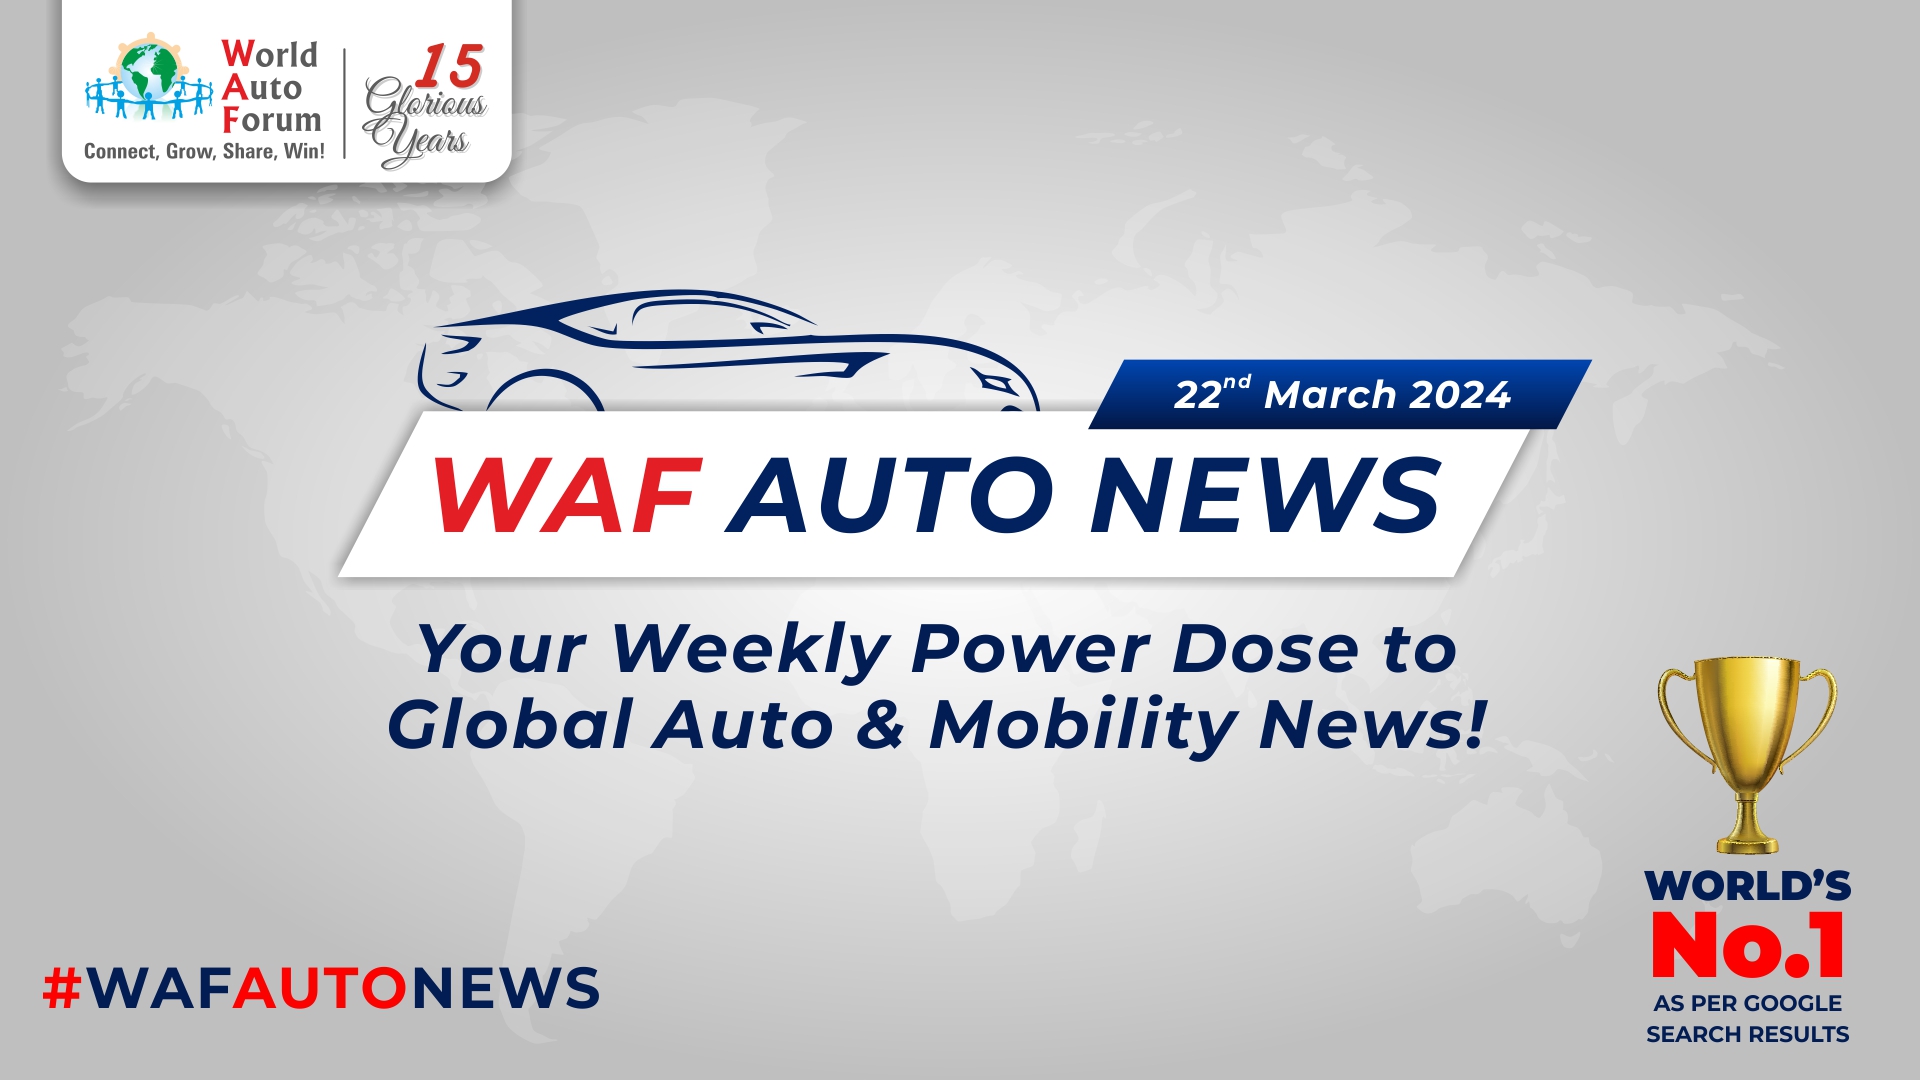 WAF Auto News | The Auto World This Week (22nd March 2024) | World Auto Forum